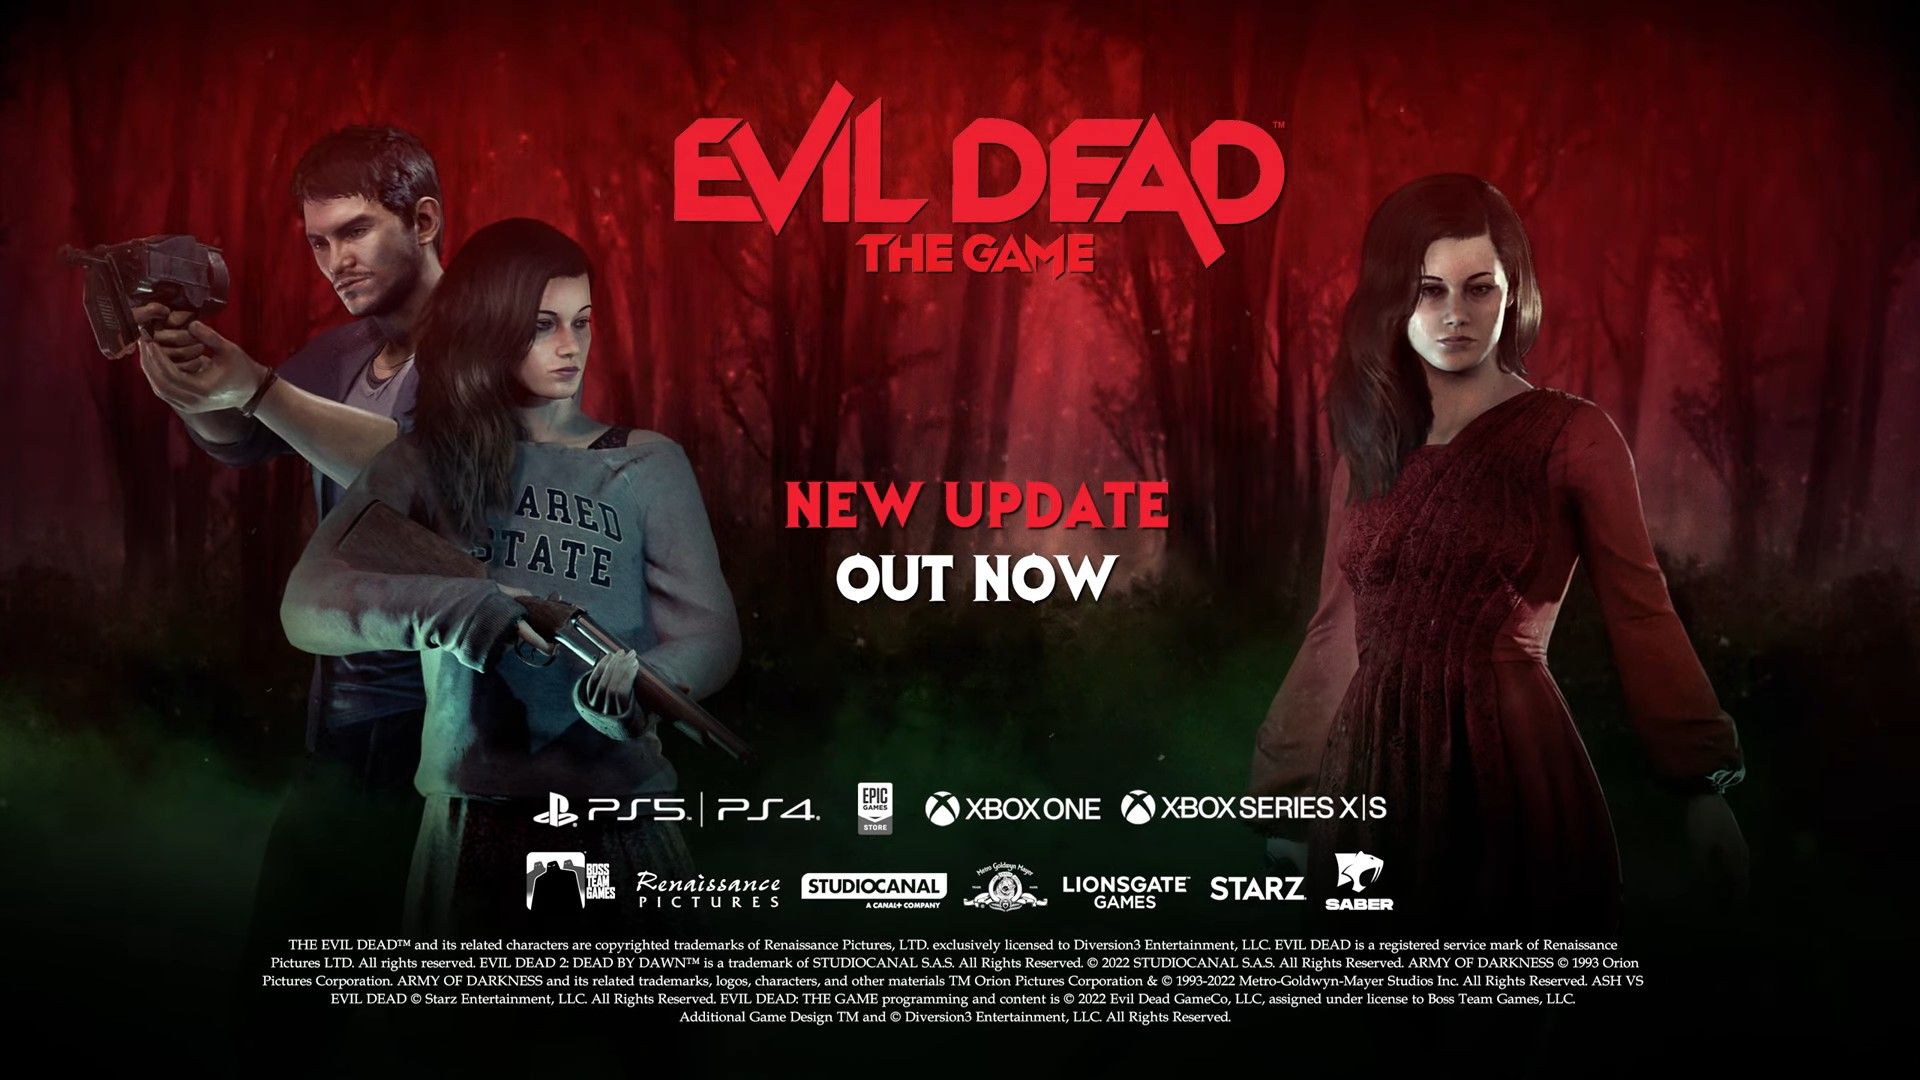 Evil Dead The Game Update Brings Mia and David from 2013 Movie